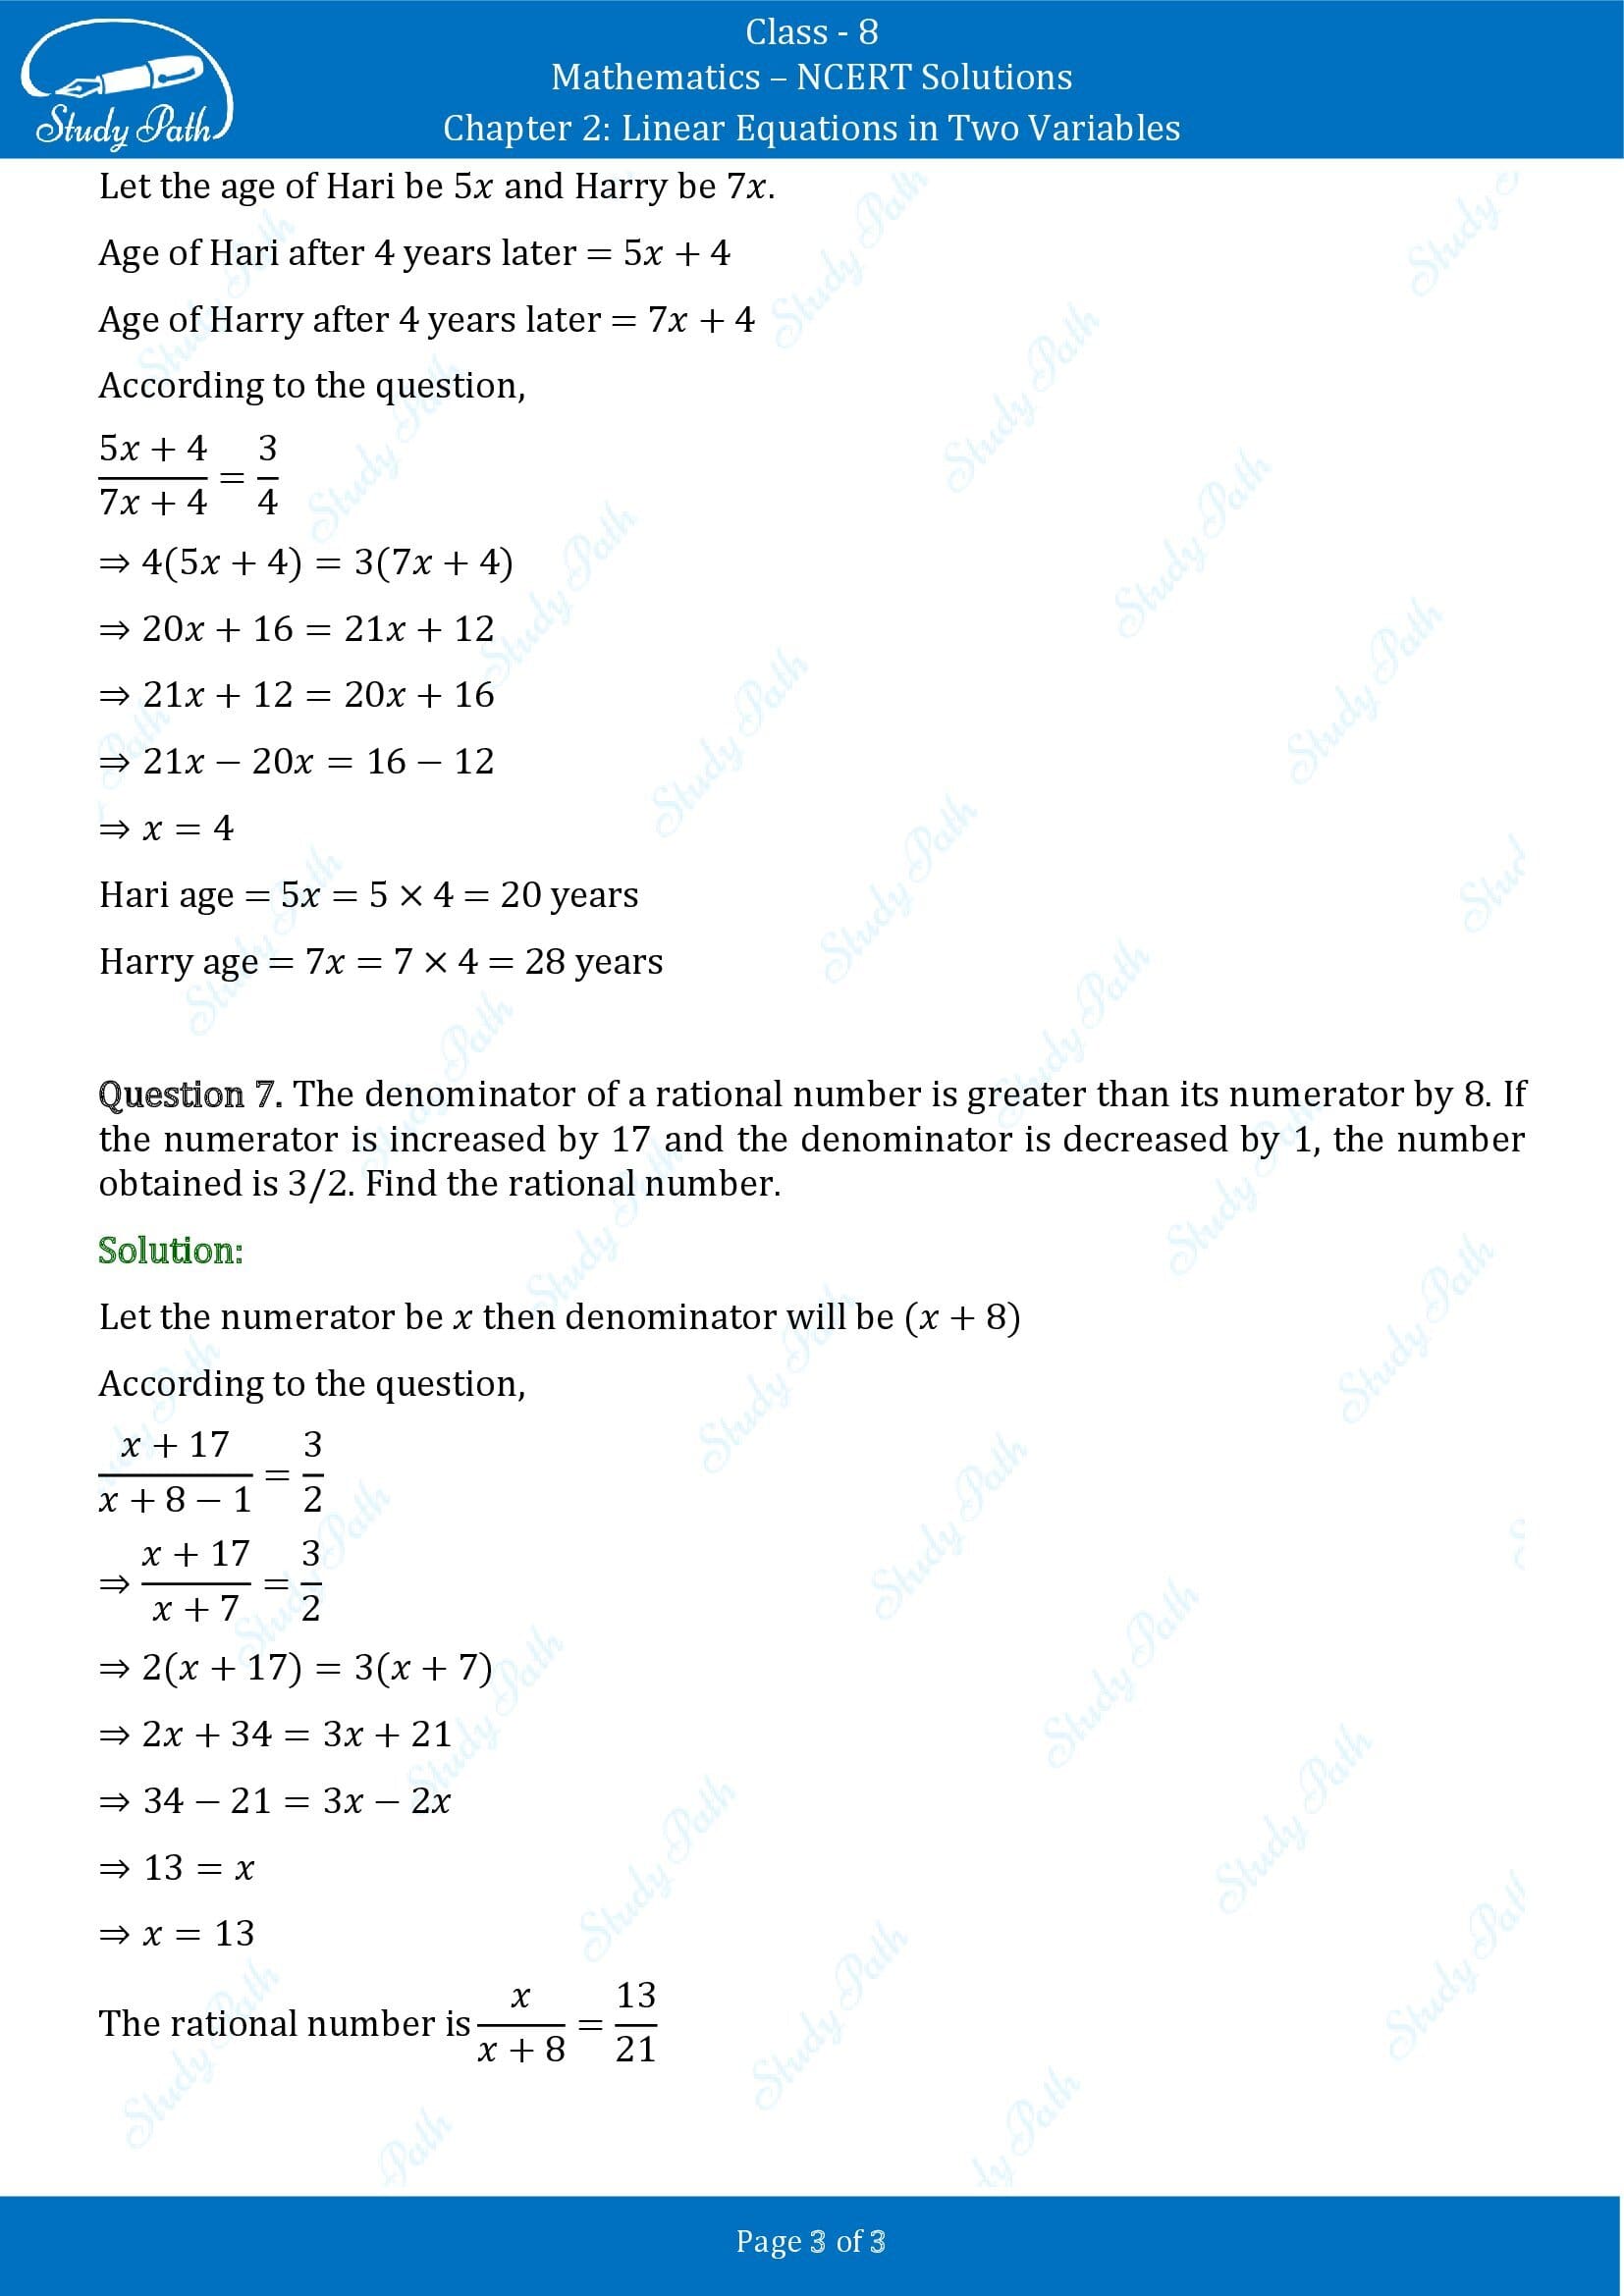 NCERT Solutions for Class 8 Maths Chapter 2 Linear Equations in Two Variables Exercise 2.6 00003